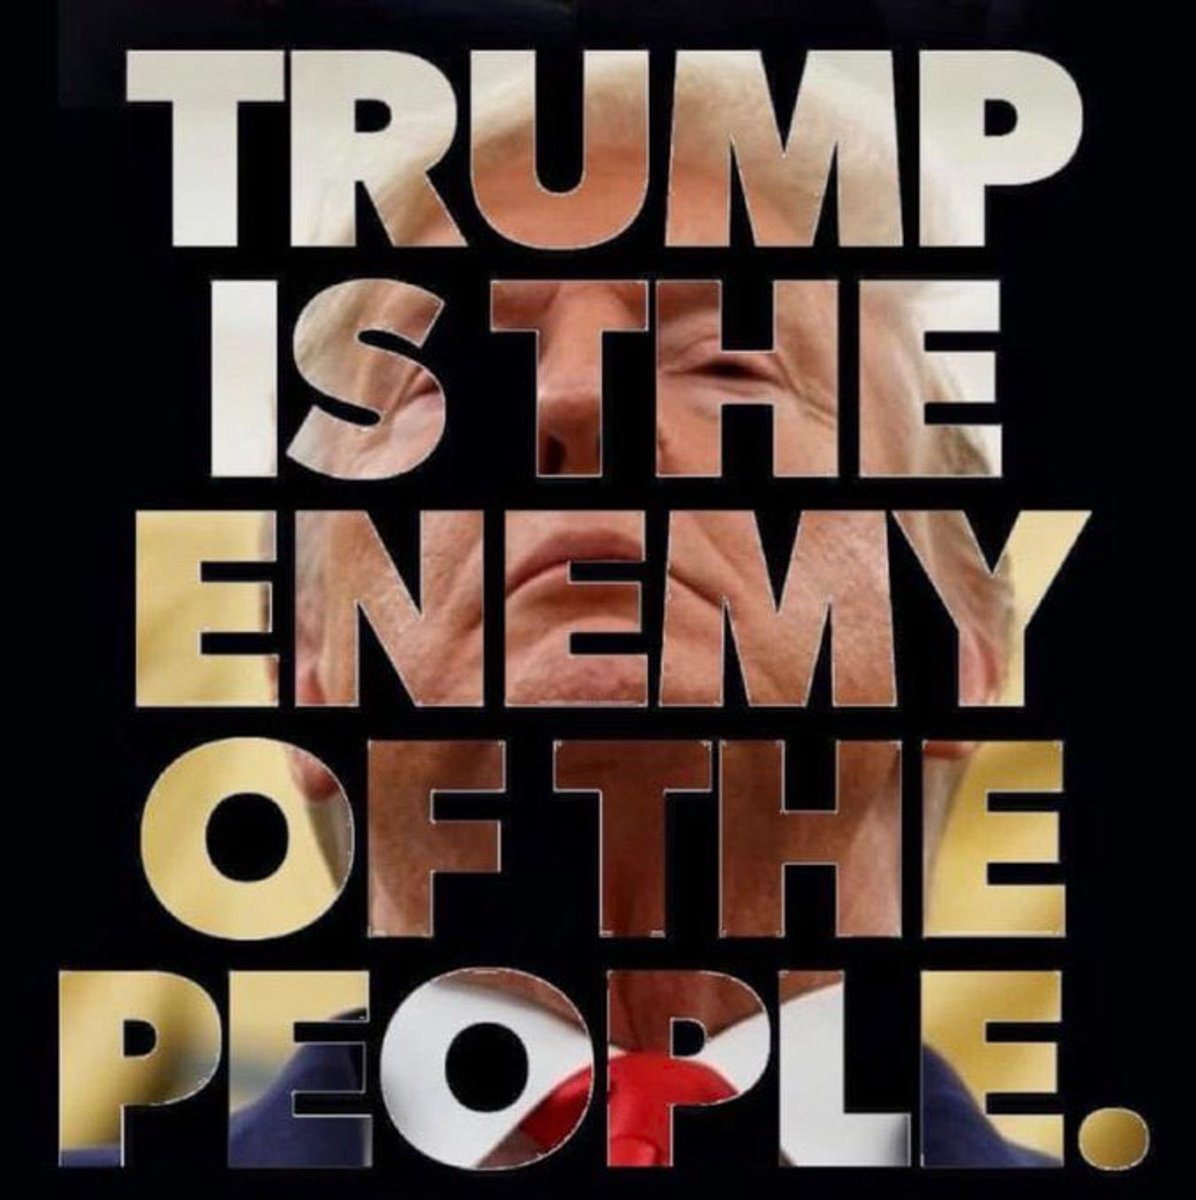 I said it before and I'll say it again, Donald Trump is our enemy, he's not our friend! Who agrees with me? 🙋‍♂️ 🙋‍♀️ 🙋